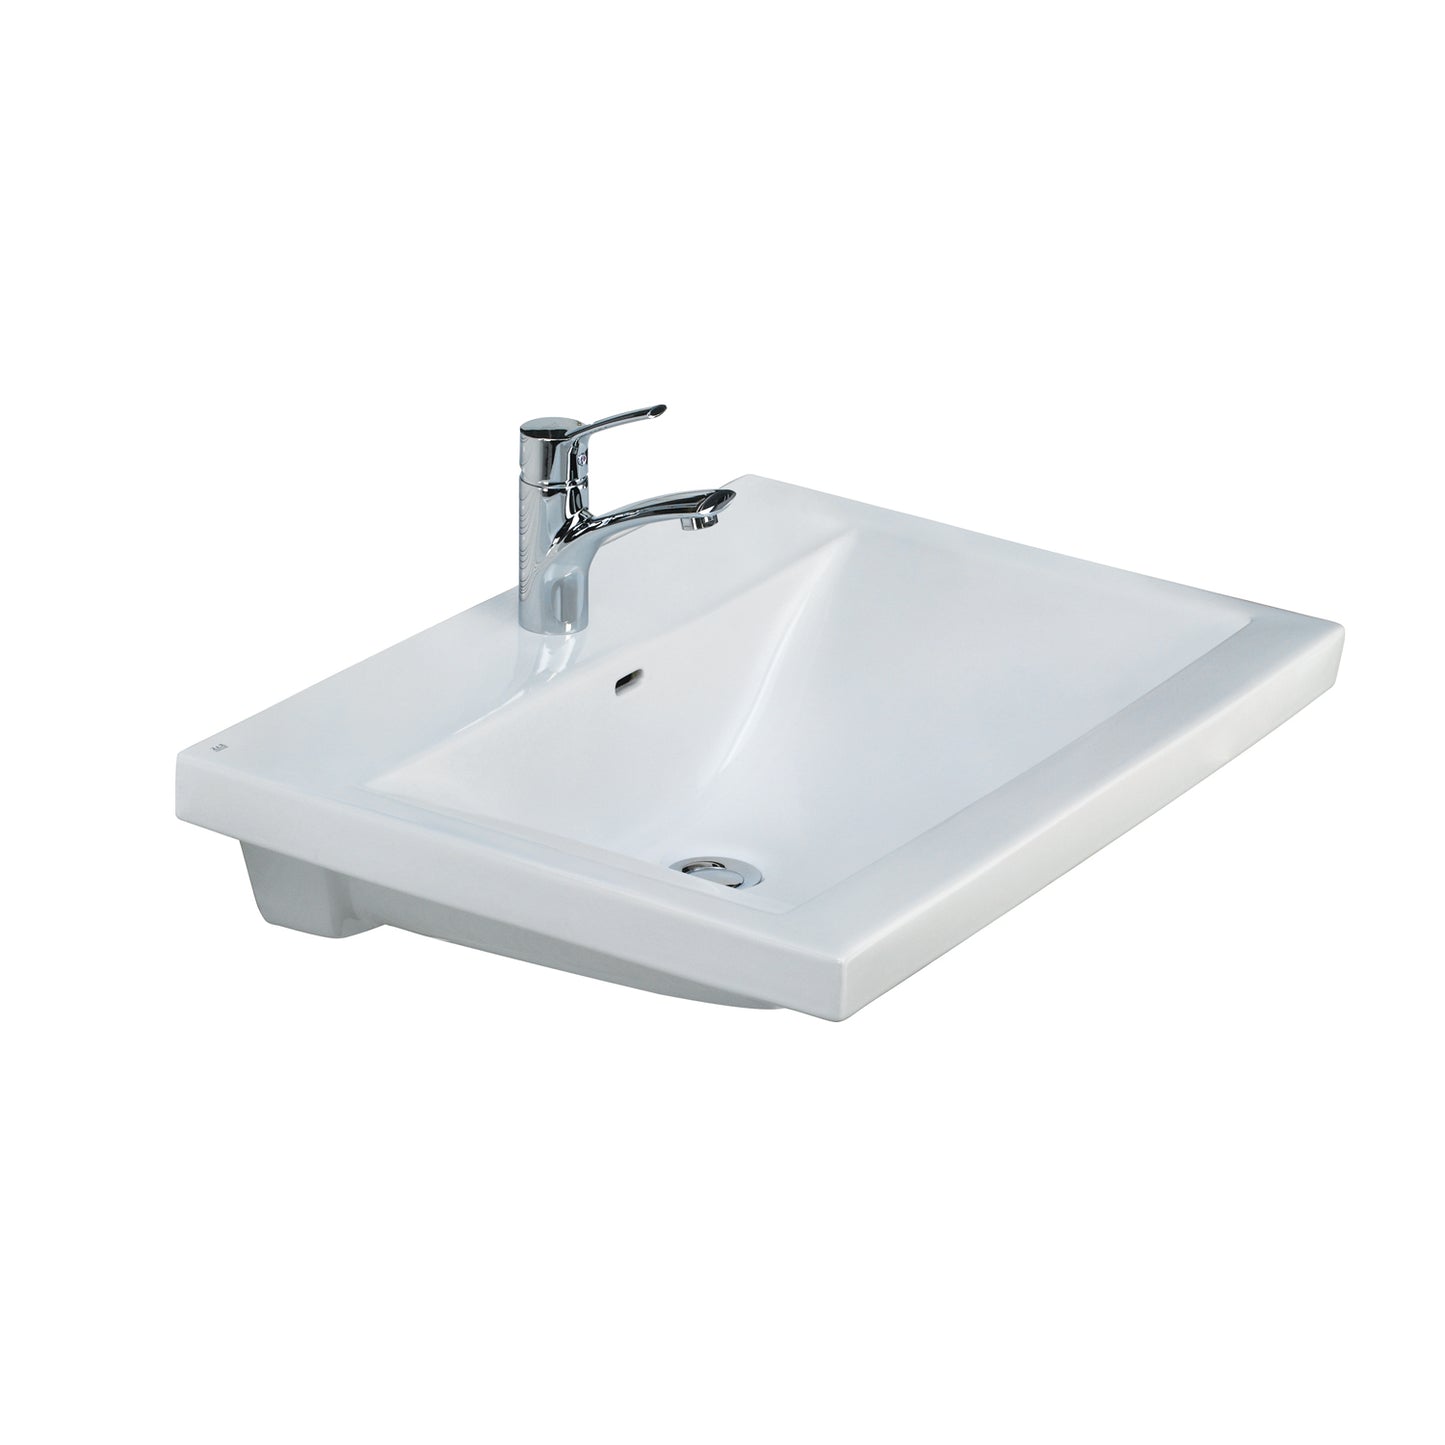 Mistral 510 Wall Hung Bathroom Sink 8" Widespread White